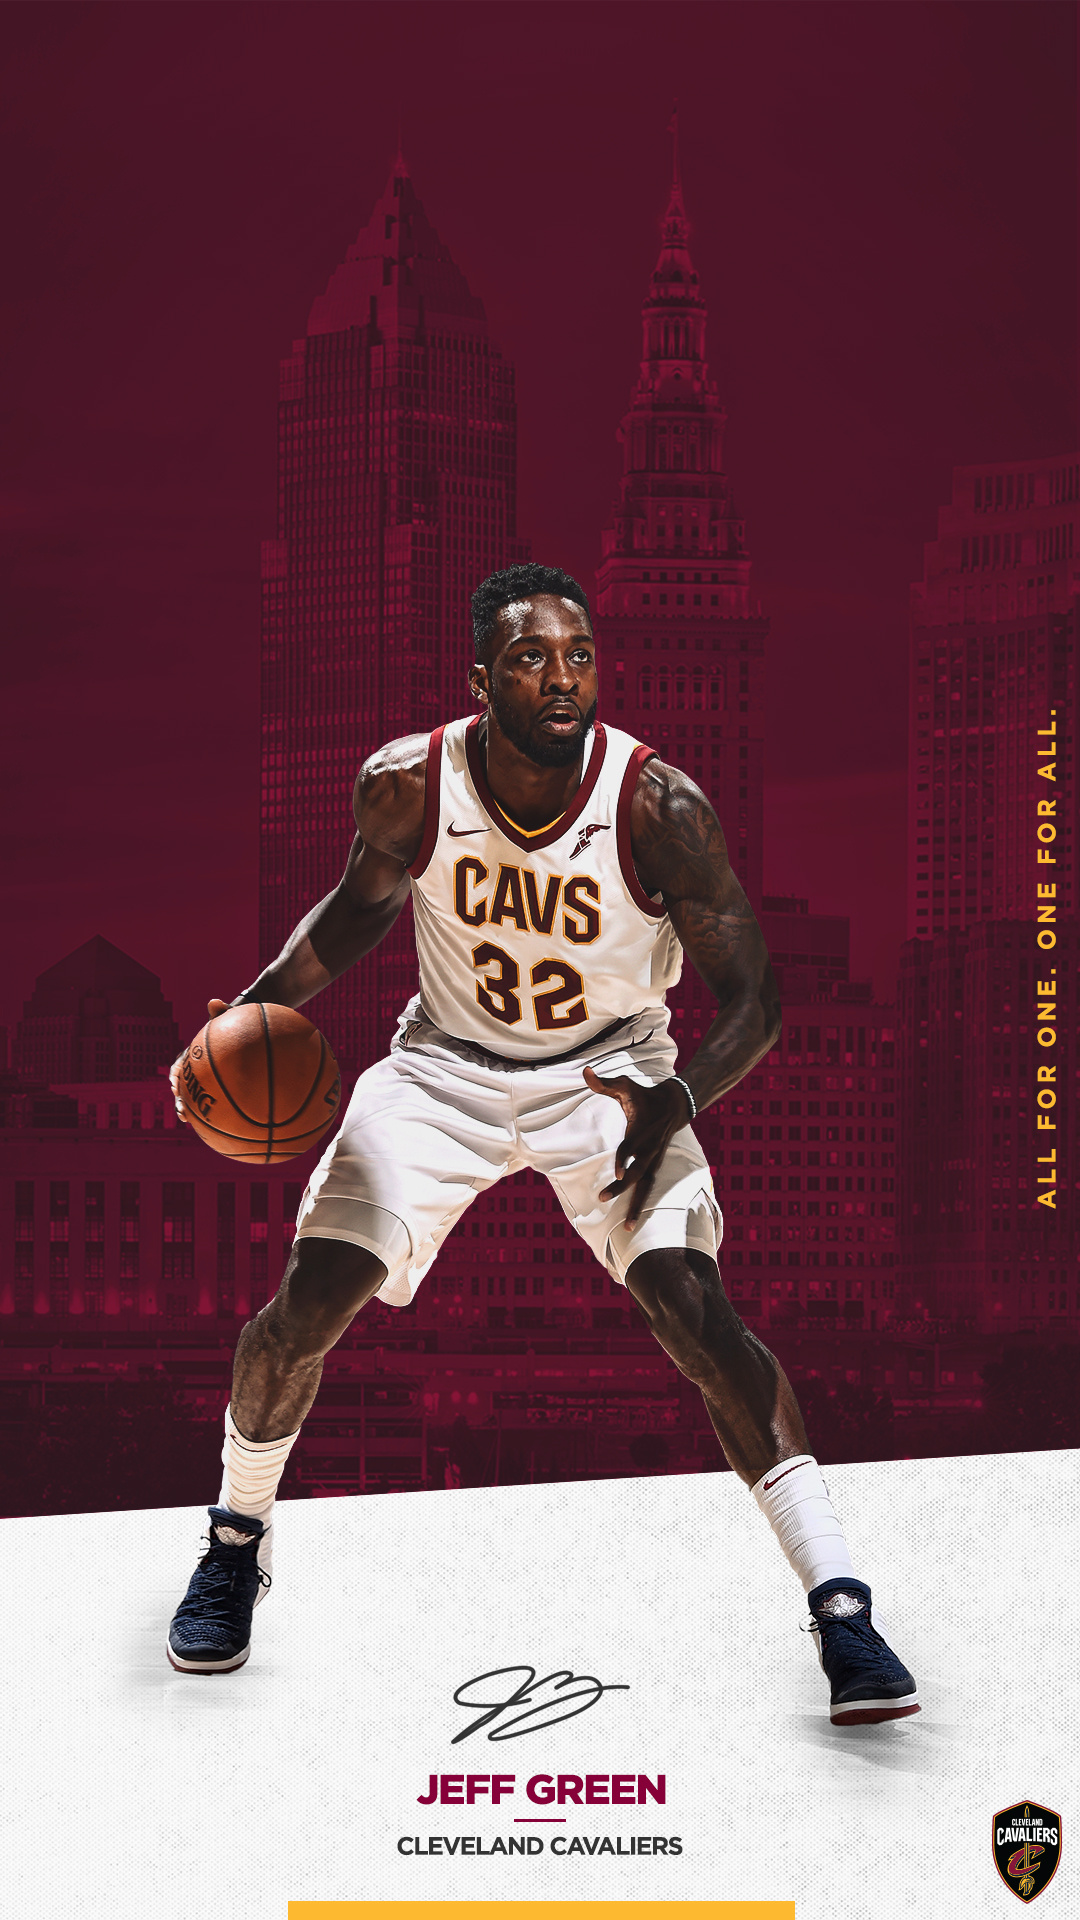 Cleveland Cavaliers: Jeff Green, The team had the No. 1 pick in the 2003 NBA draft. 1080x1920 Full HD Wallpaper.